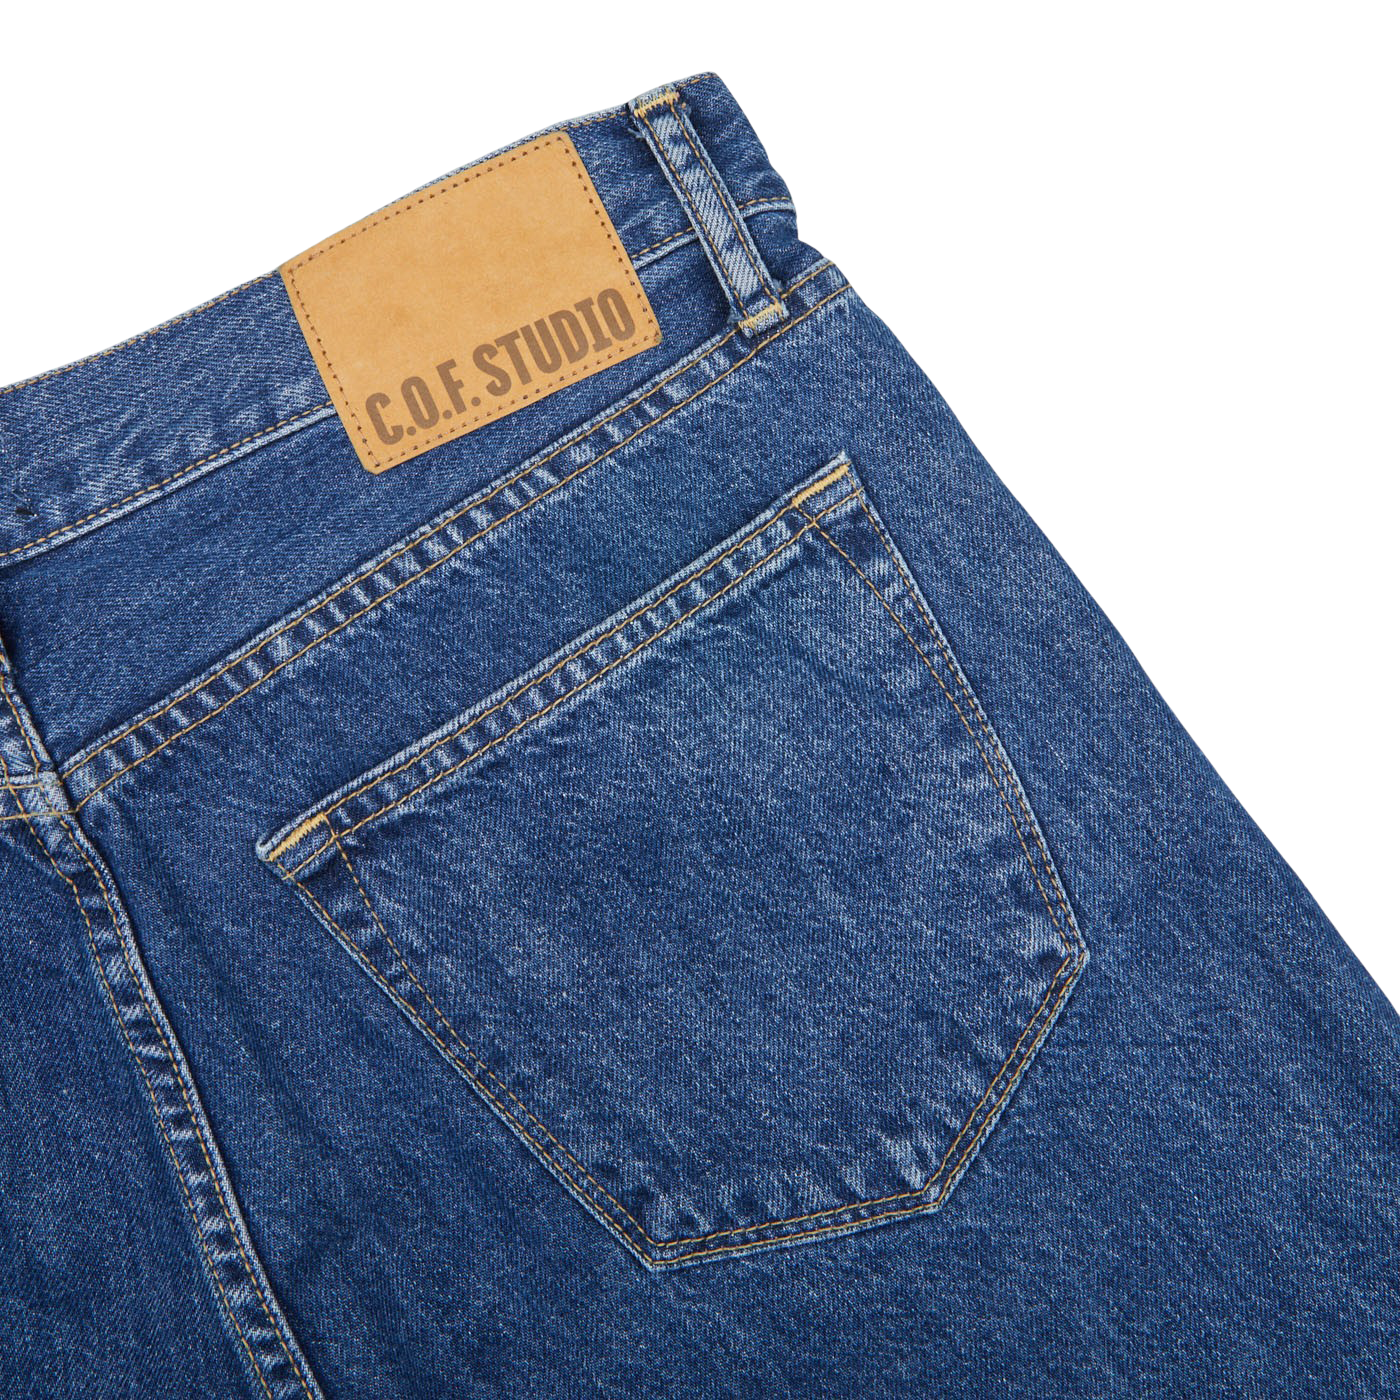 The C.O.F Studio Blue Organic Candiani Cotton M6 6x Wash Jeans feature a back pocket.